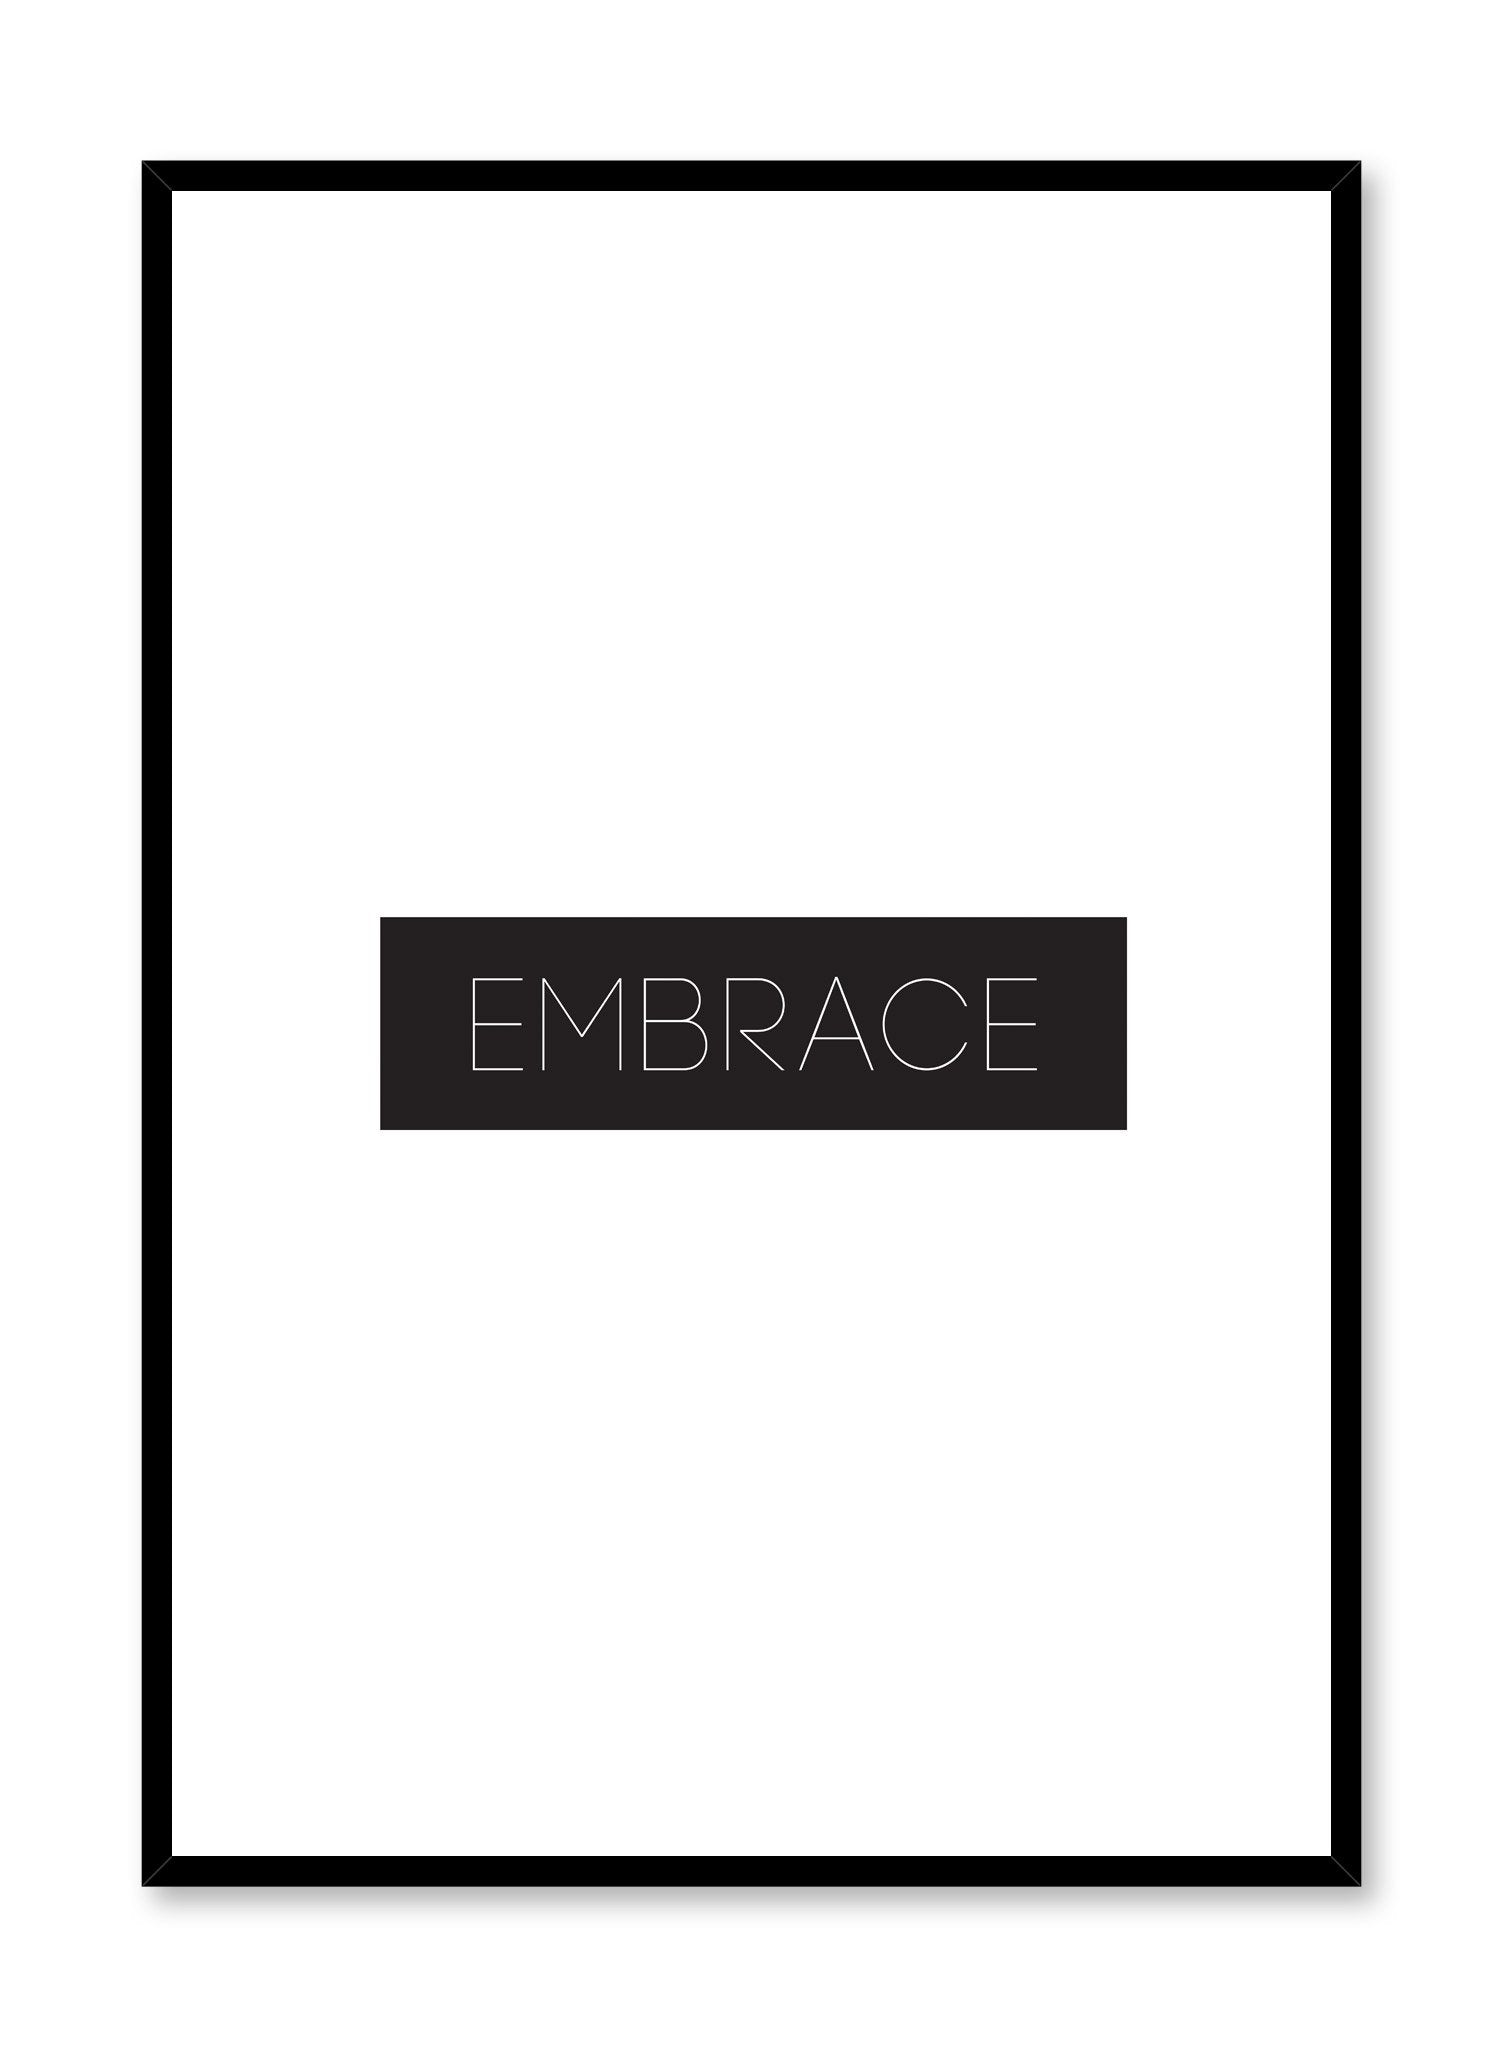 Scandinavian poster with black and white graphic typography design of Embrace text by Opposite Wall